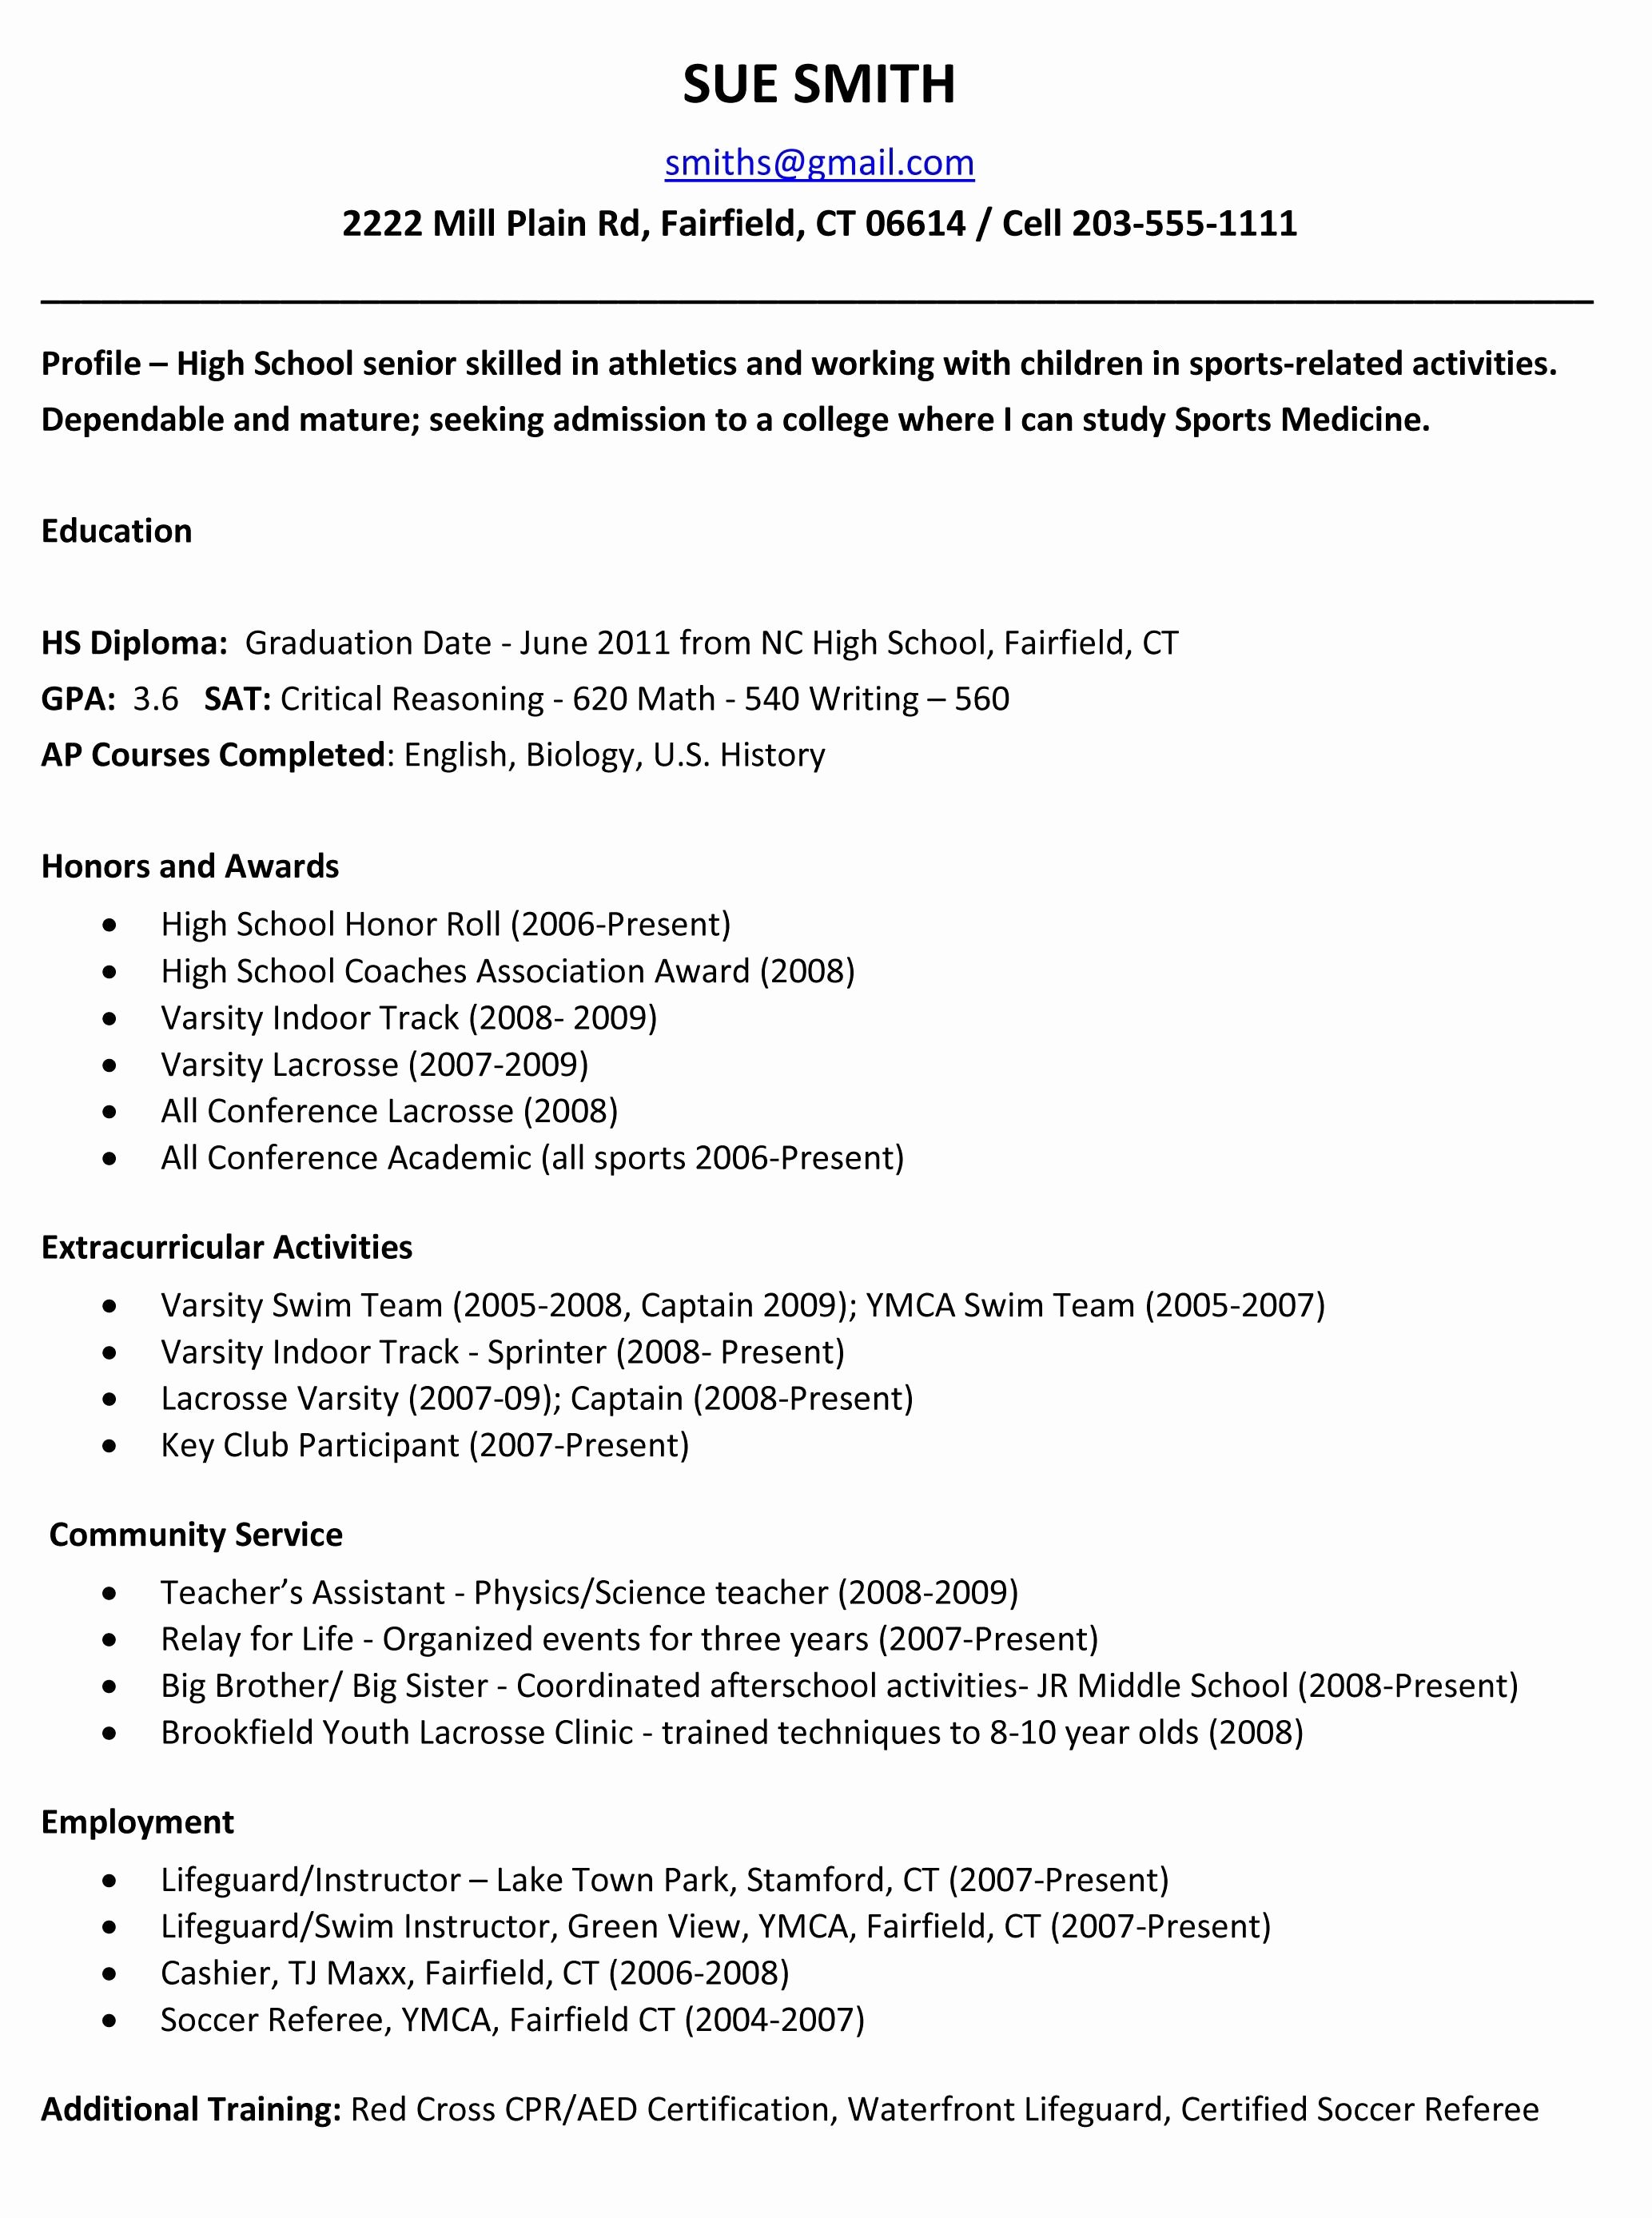 Resume Examples for Highschool Students Inspirational Example Resume for High School Students for College